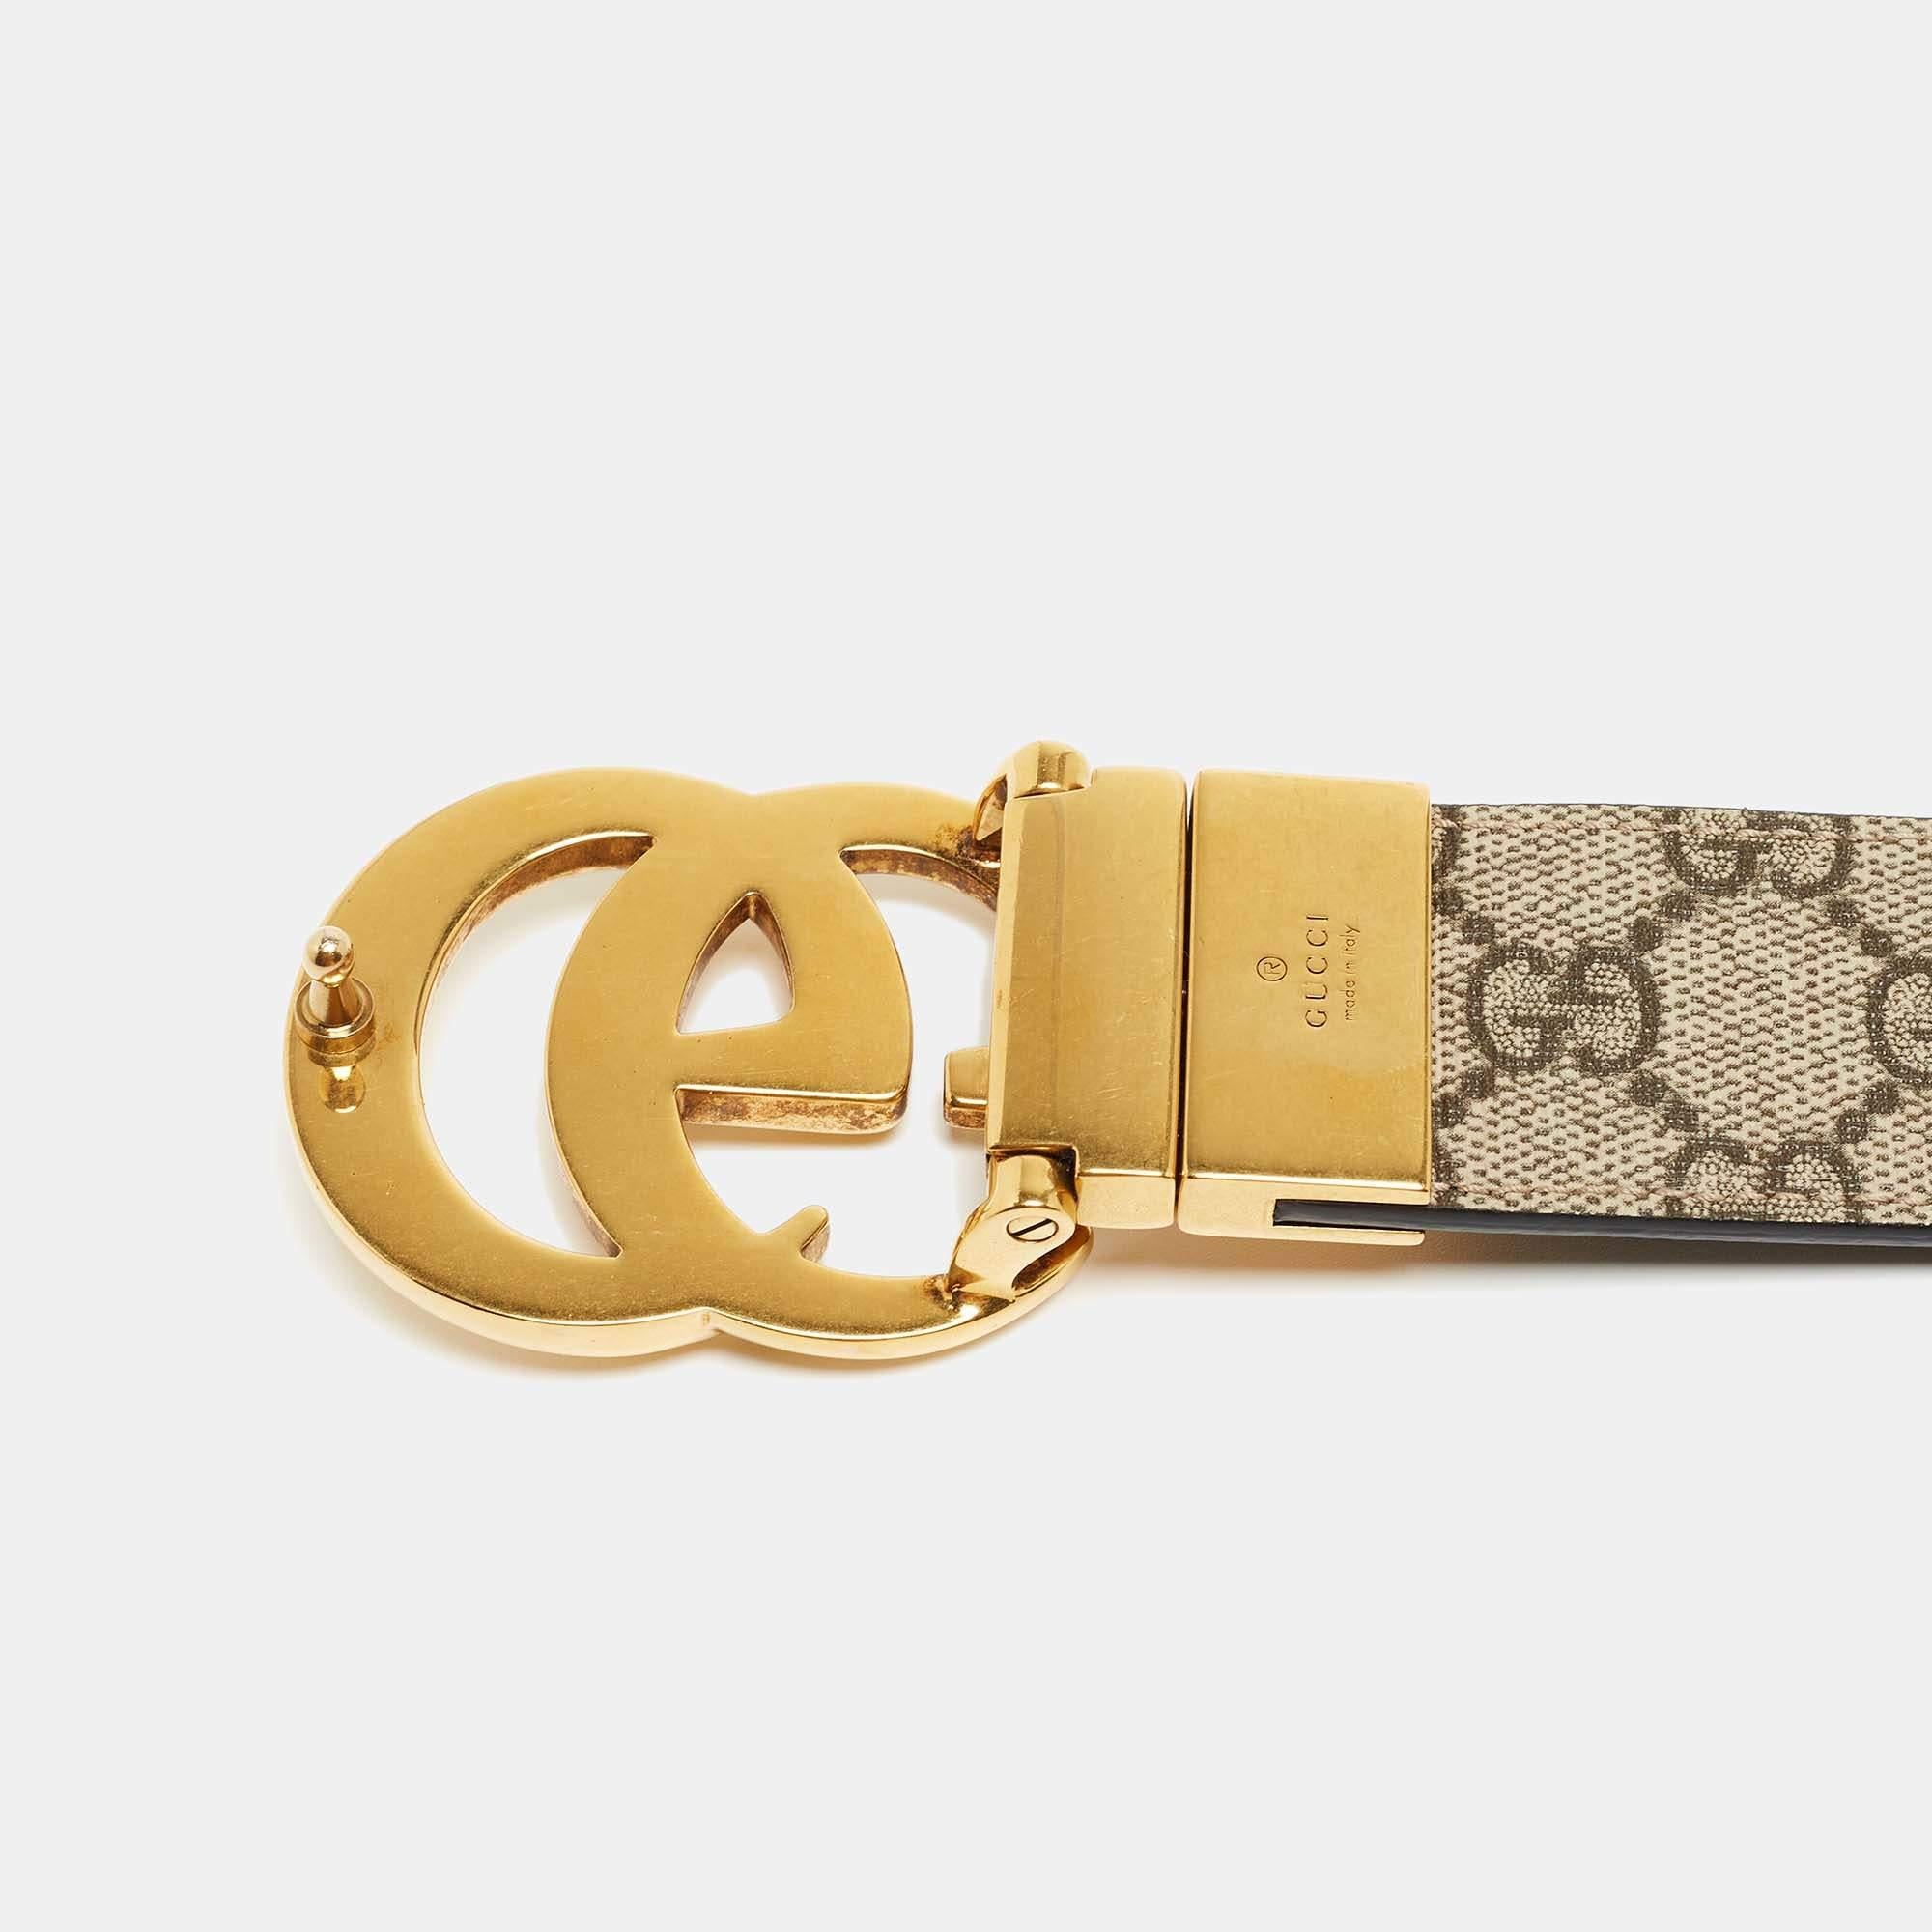 Gucci Black/Beige GG Supreme and Leather GG Marmont Belt 65CM 2